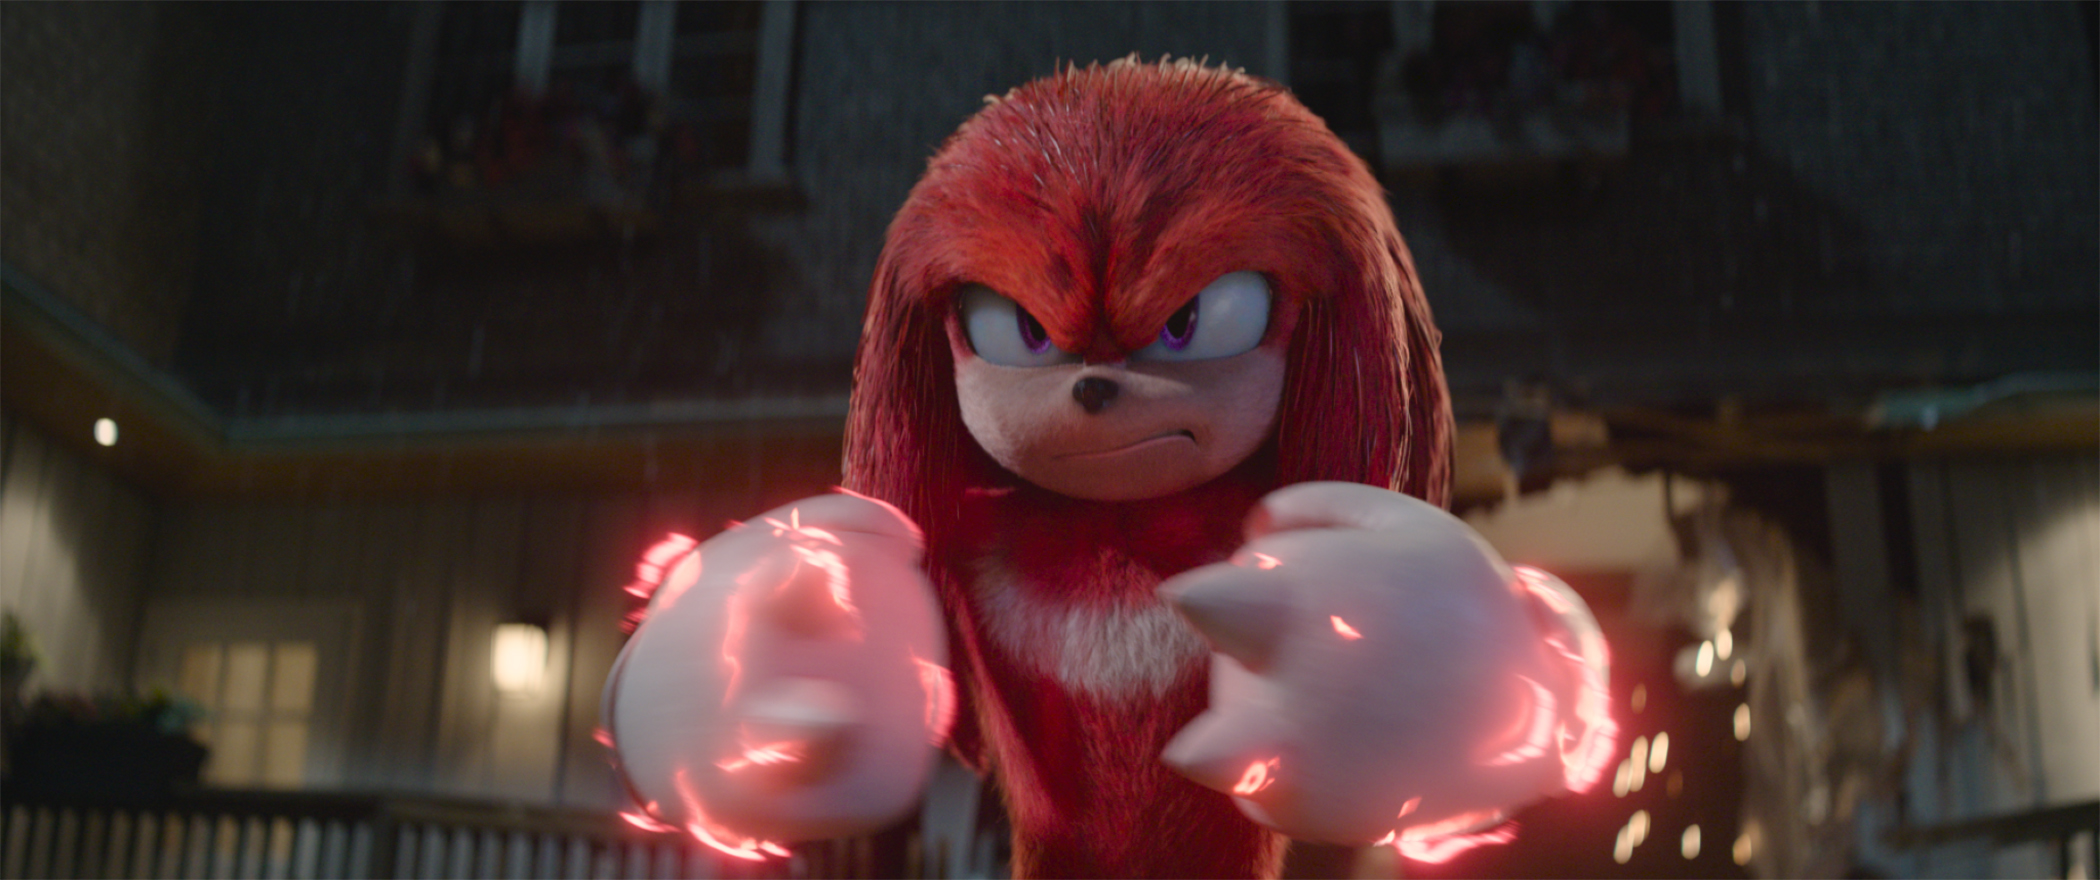 knuckles in sonic 2 movie. his knuckles are glowing with power. 